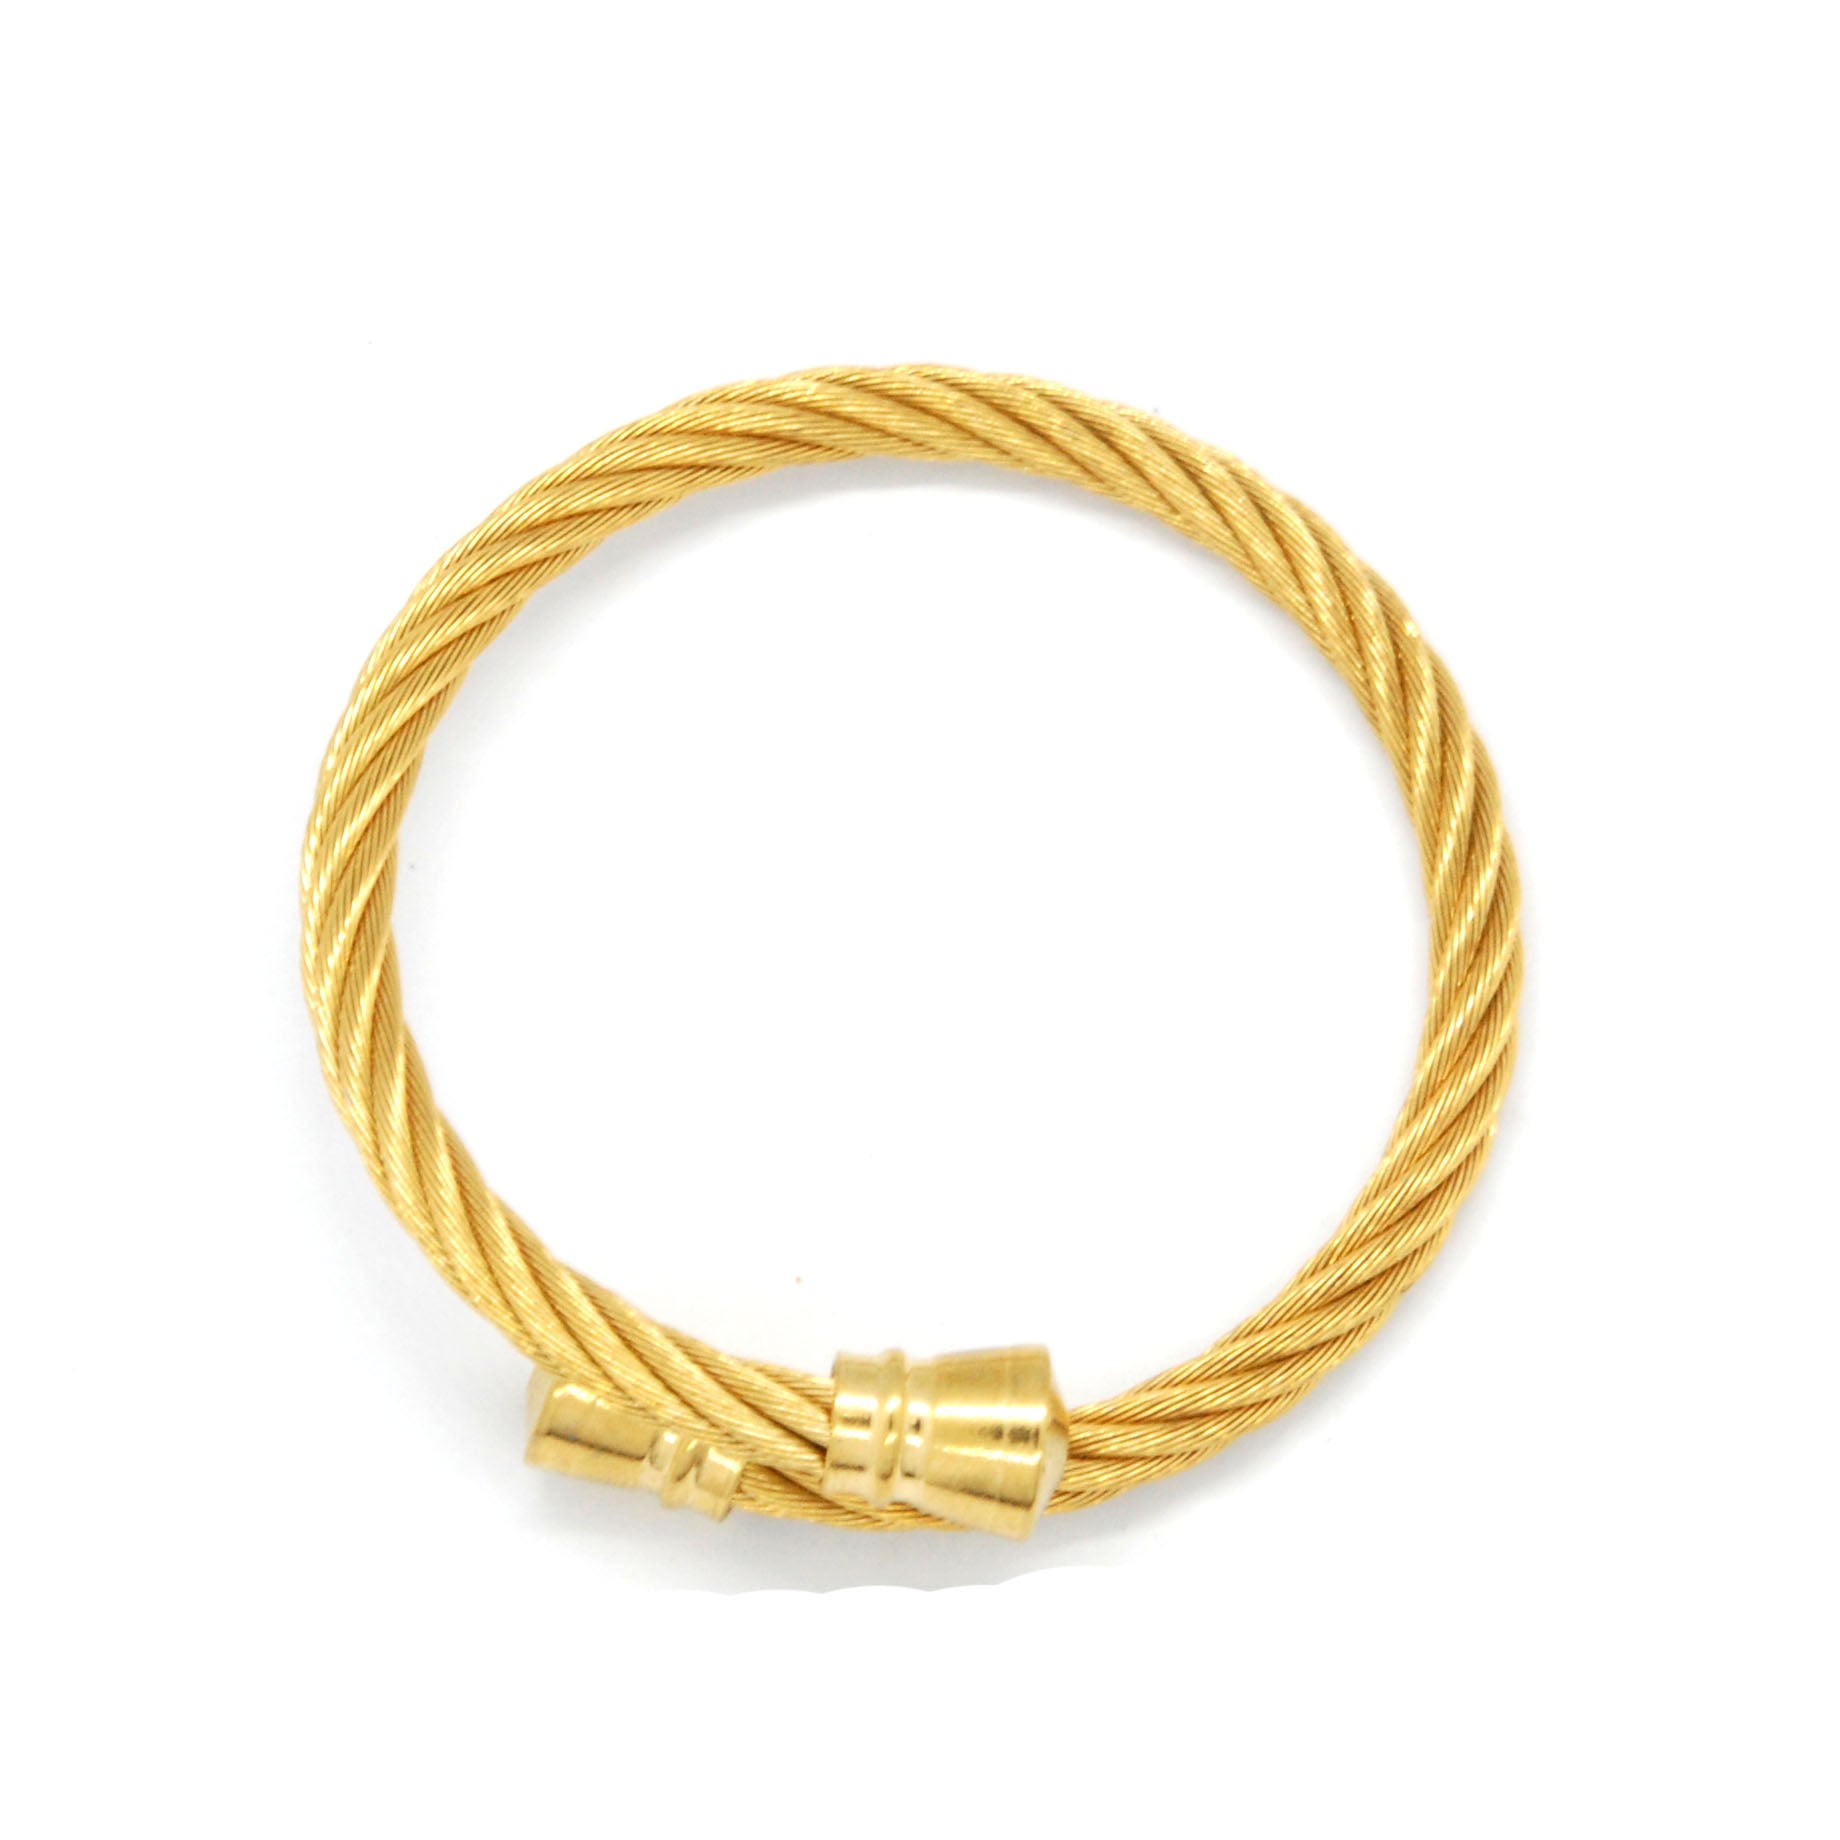 ESBG 6570: Gold-Plated Charriol Bangle w/ Gold-Plated Barrel Ends